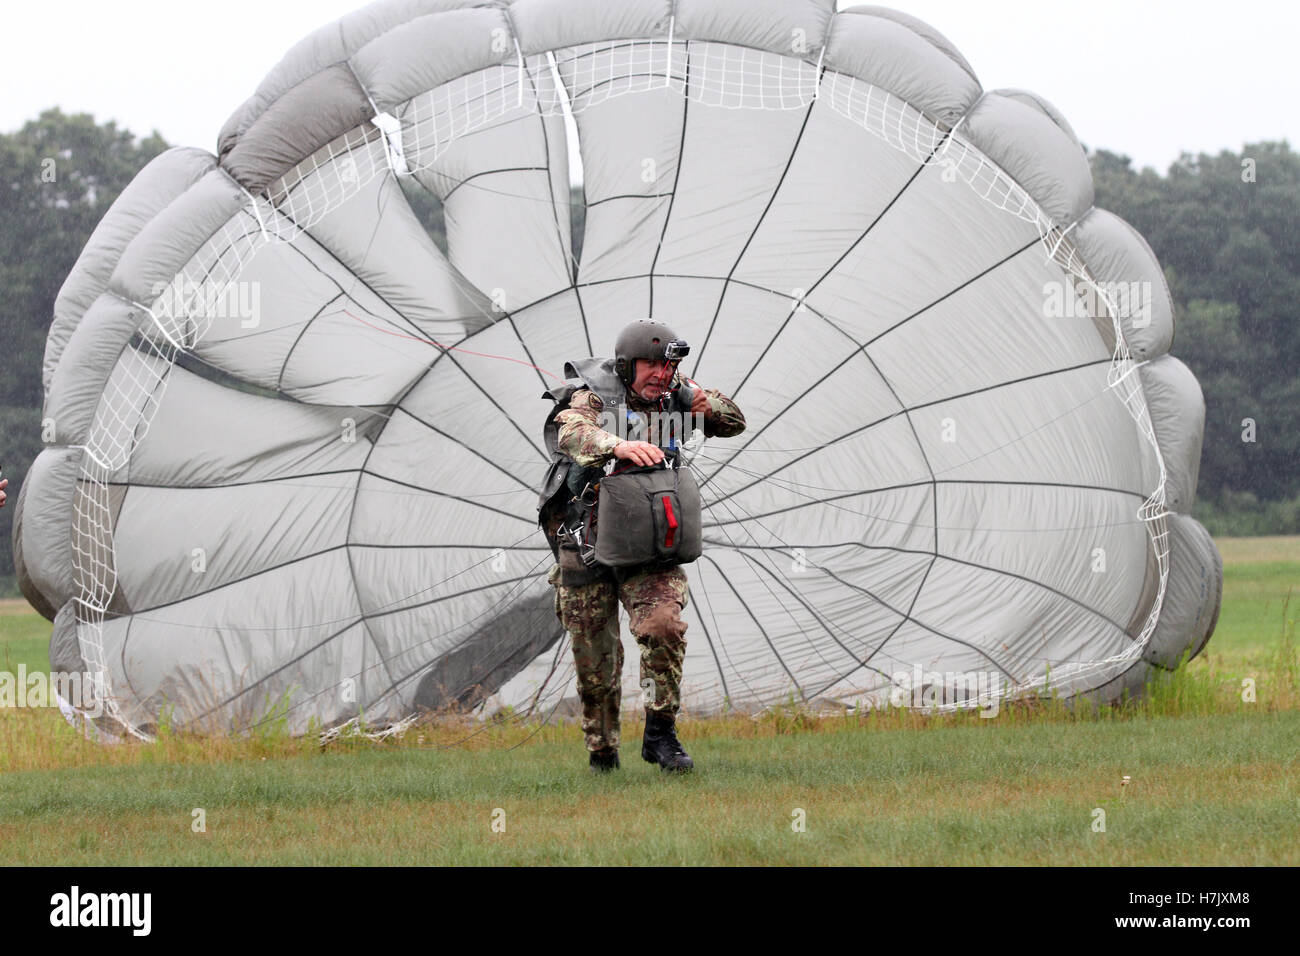 An Italian paratrooper soldier pulls his inflated parachute canopy while running to an X on the Drop Zone during the Leapfest-International Airborne Competition August 2, 2014 in West Kingston, Rhode Island. Stock Photo